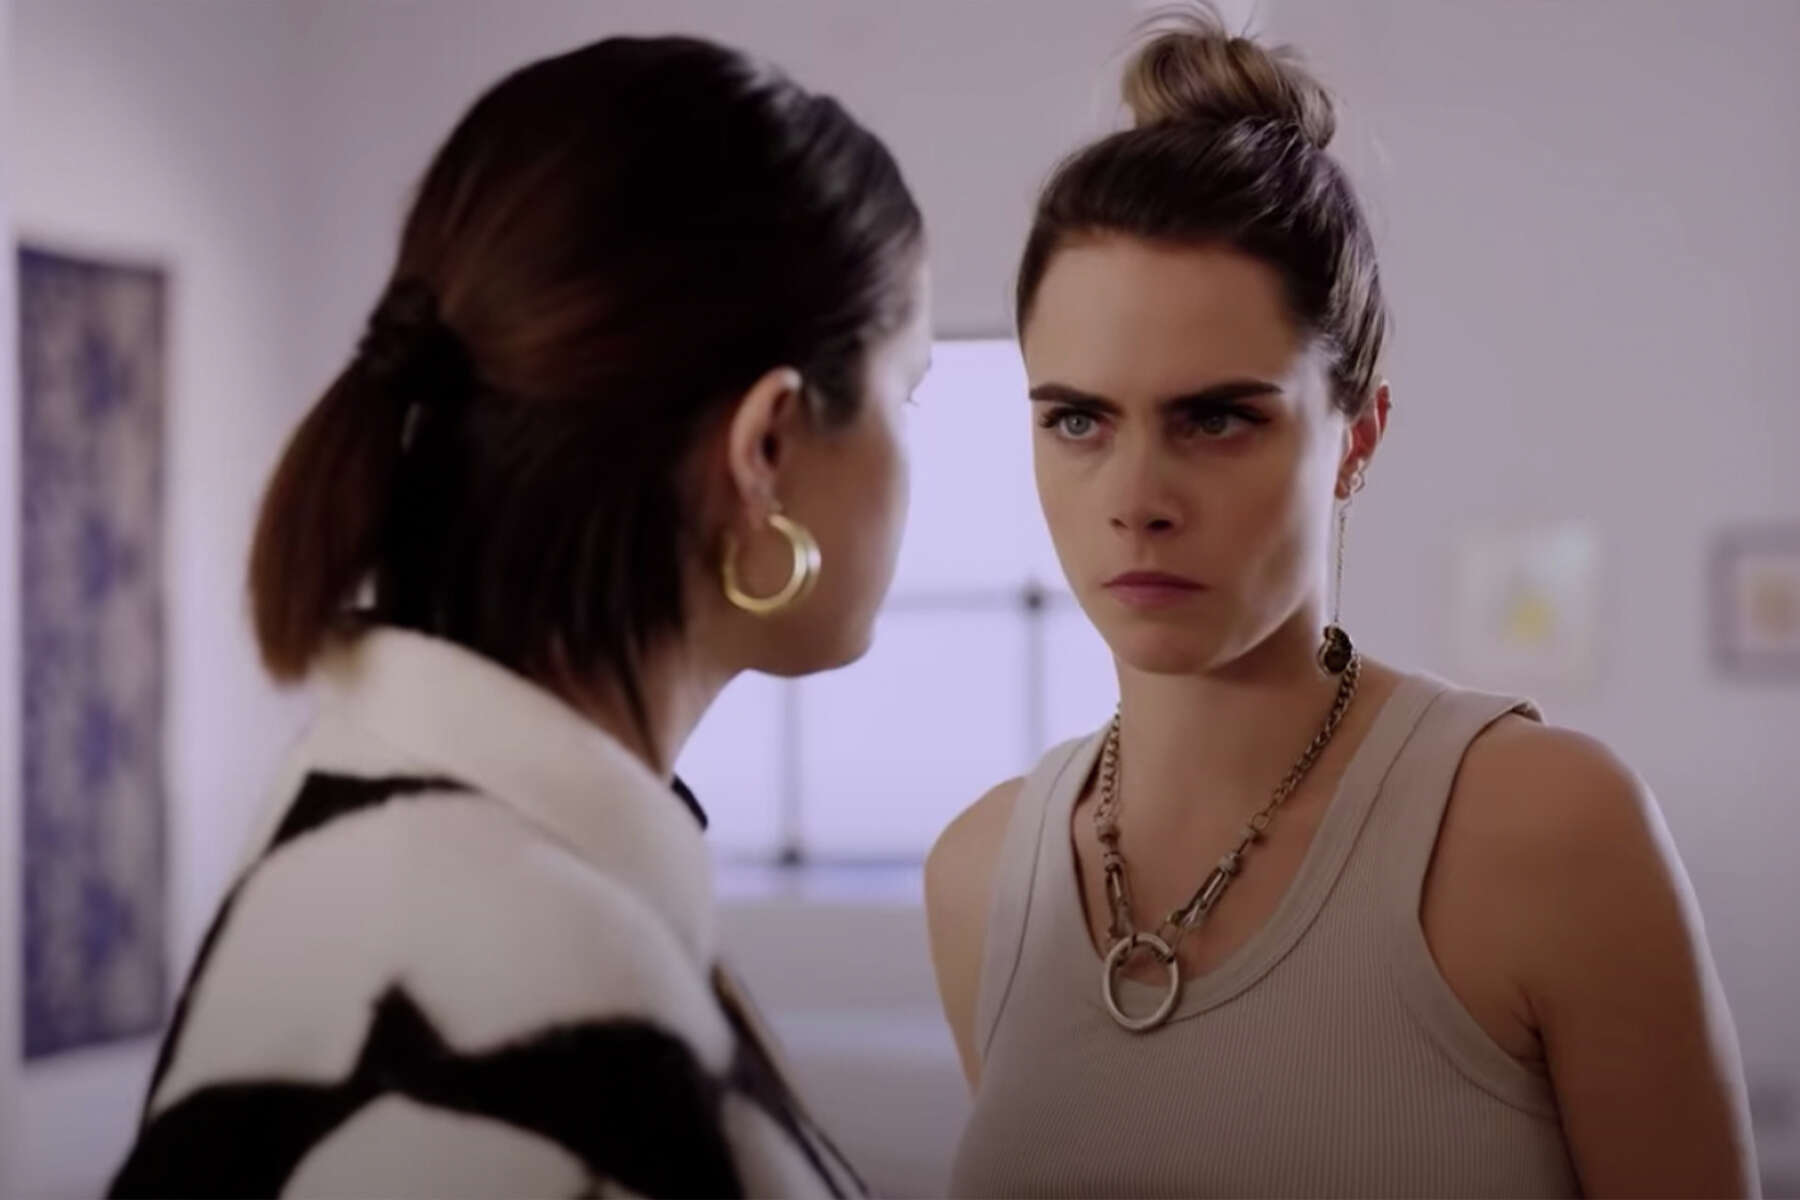 On Murders In The Building Gets Cara Delevingne For Its Second Season On Hulu